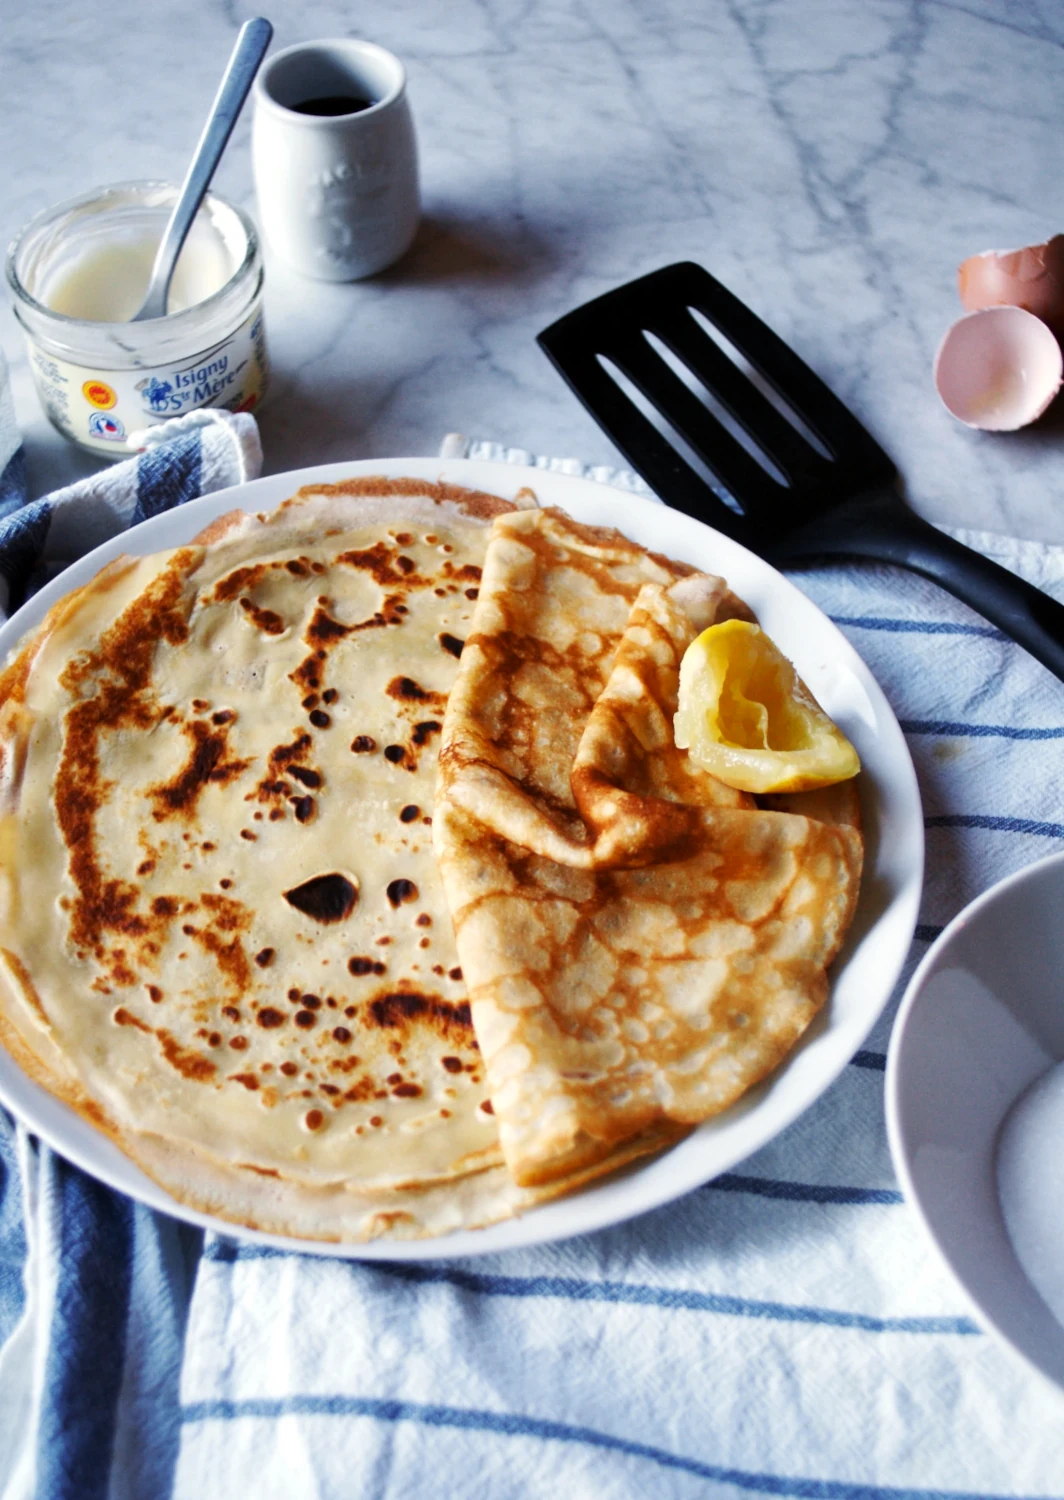 Pancake Day: French Crepes and Caramel Beurre Salé